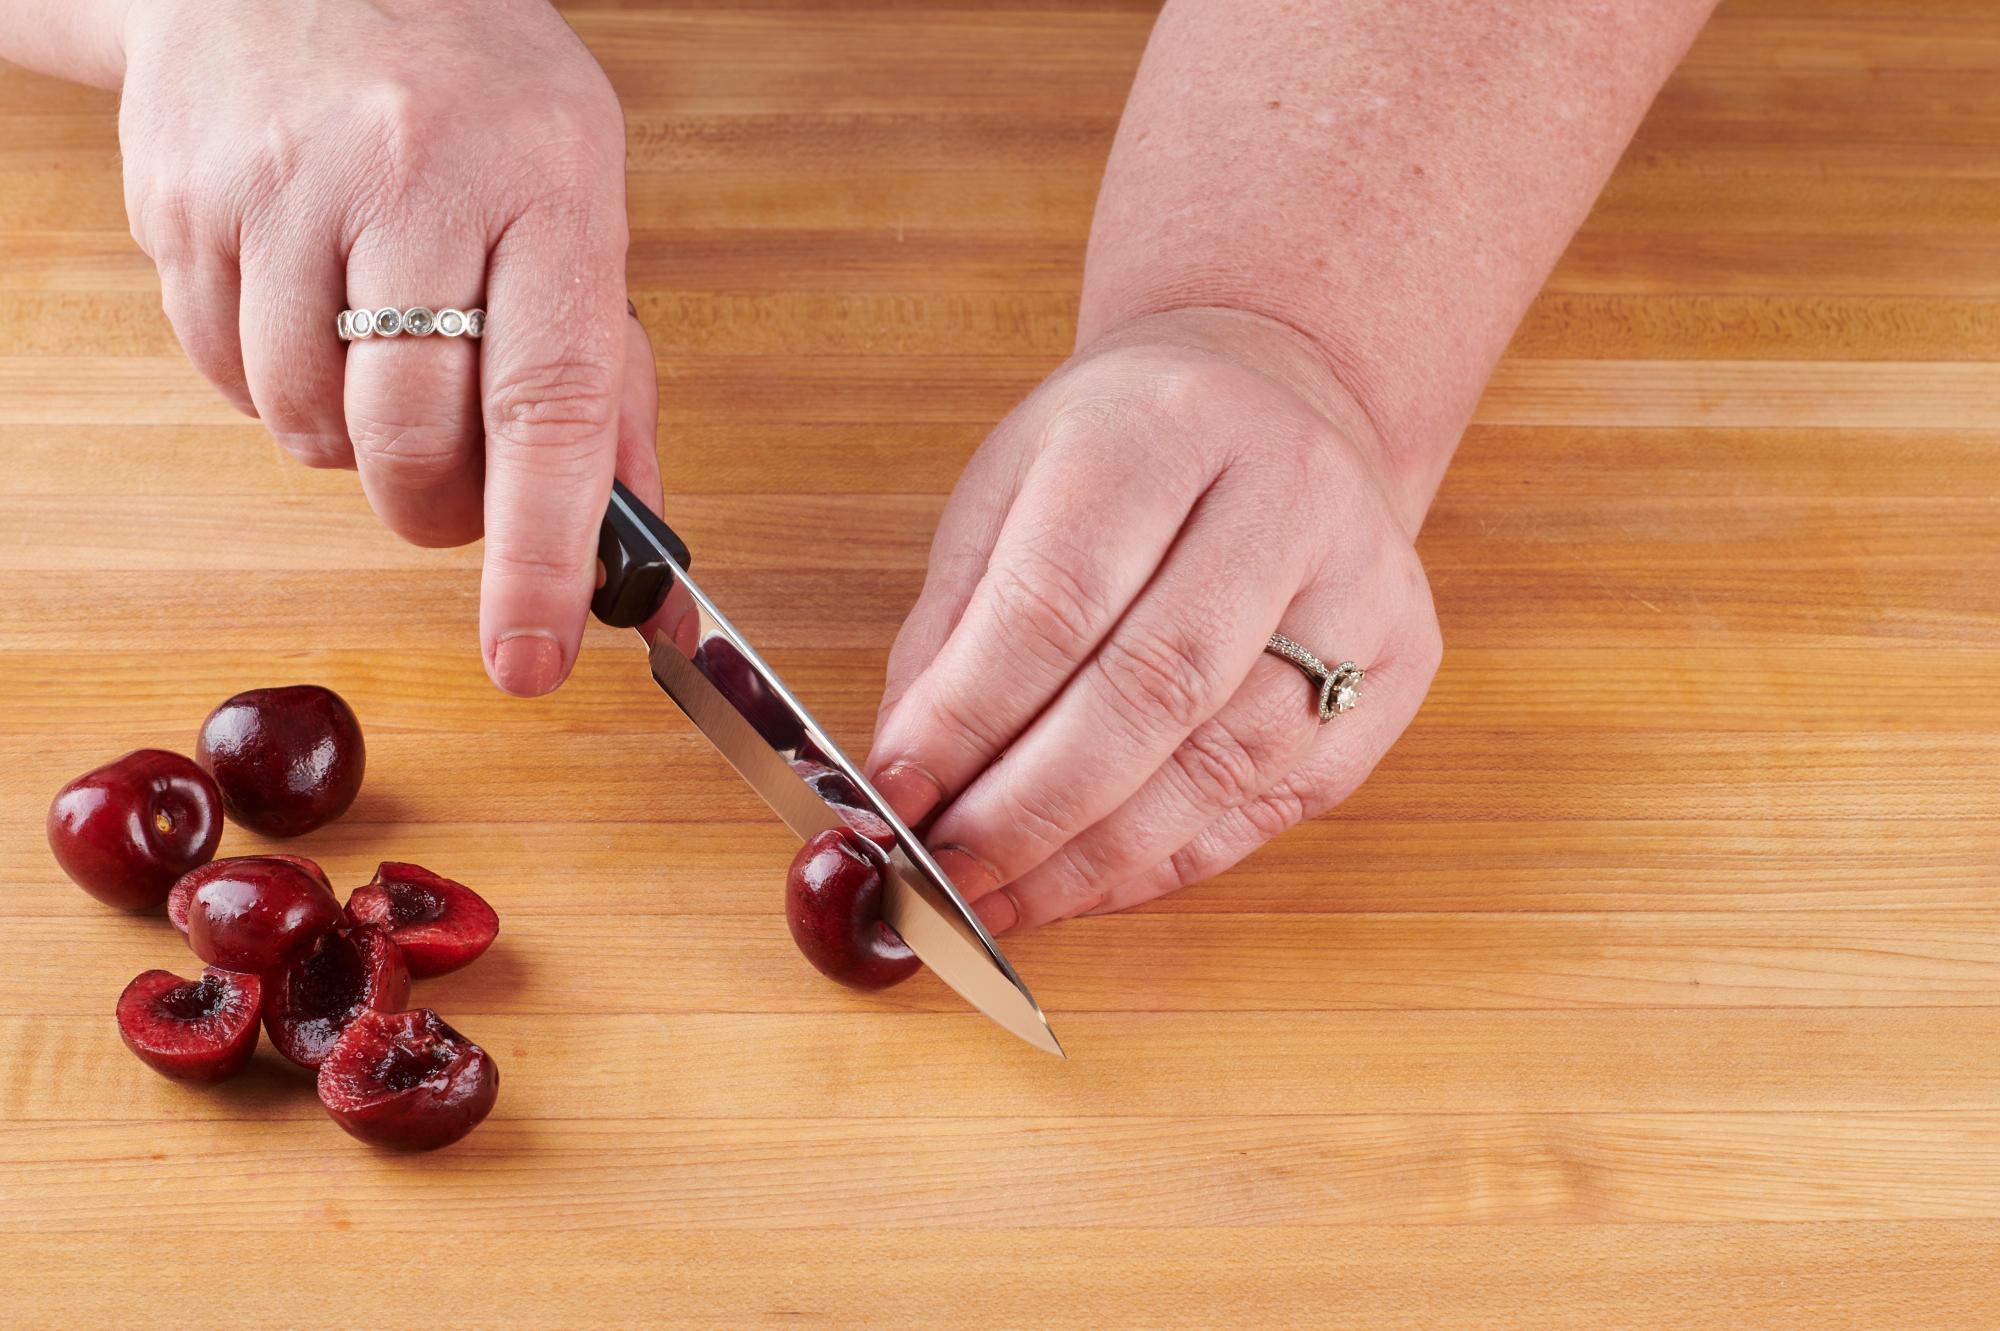 Halving the cherries with a 4 Inch Paring Knife.